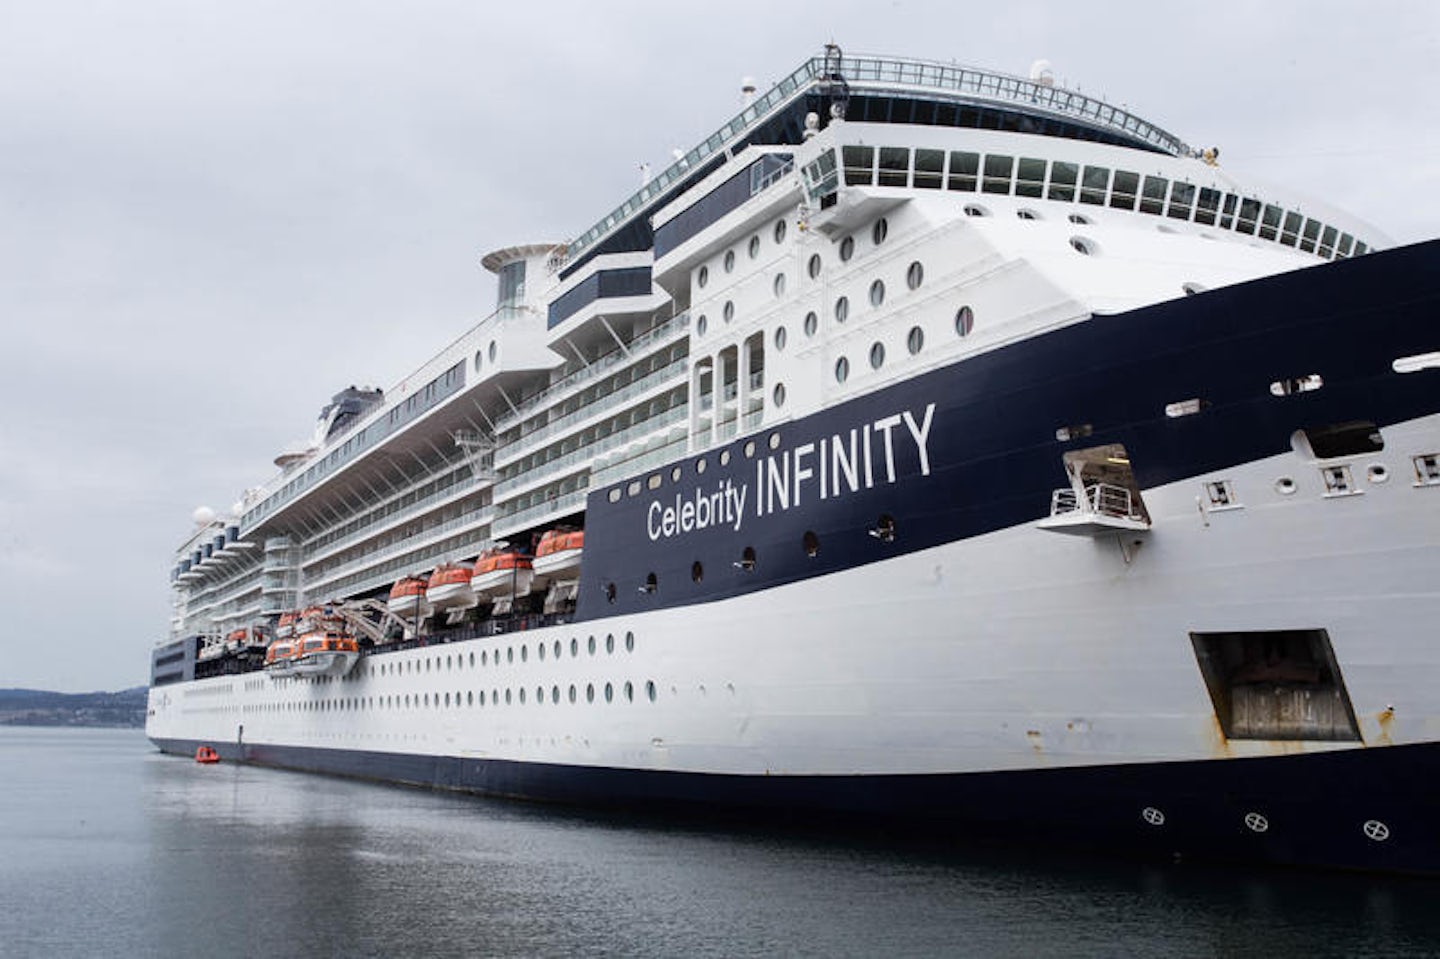 celebrity cruise ship infinity pictures